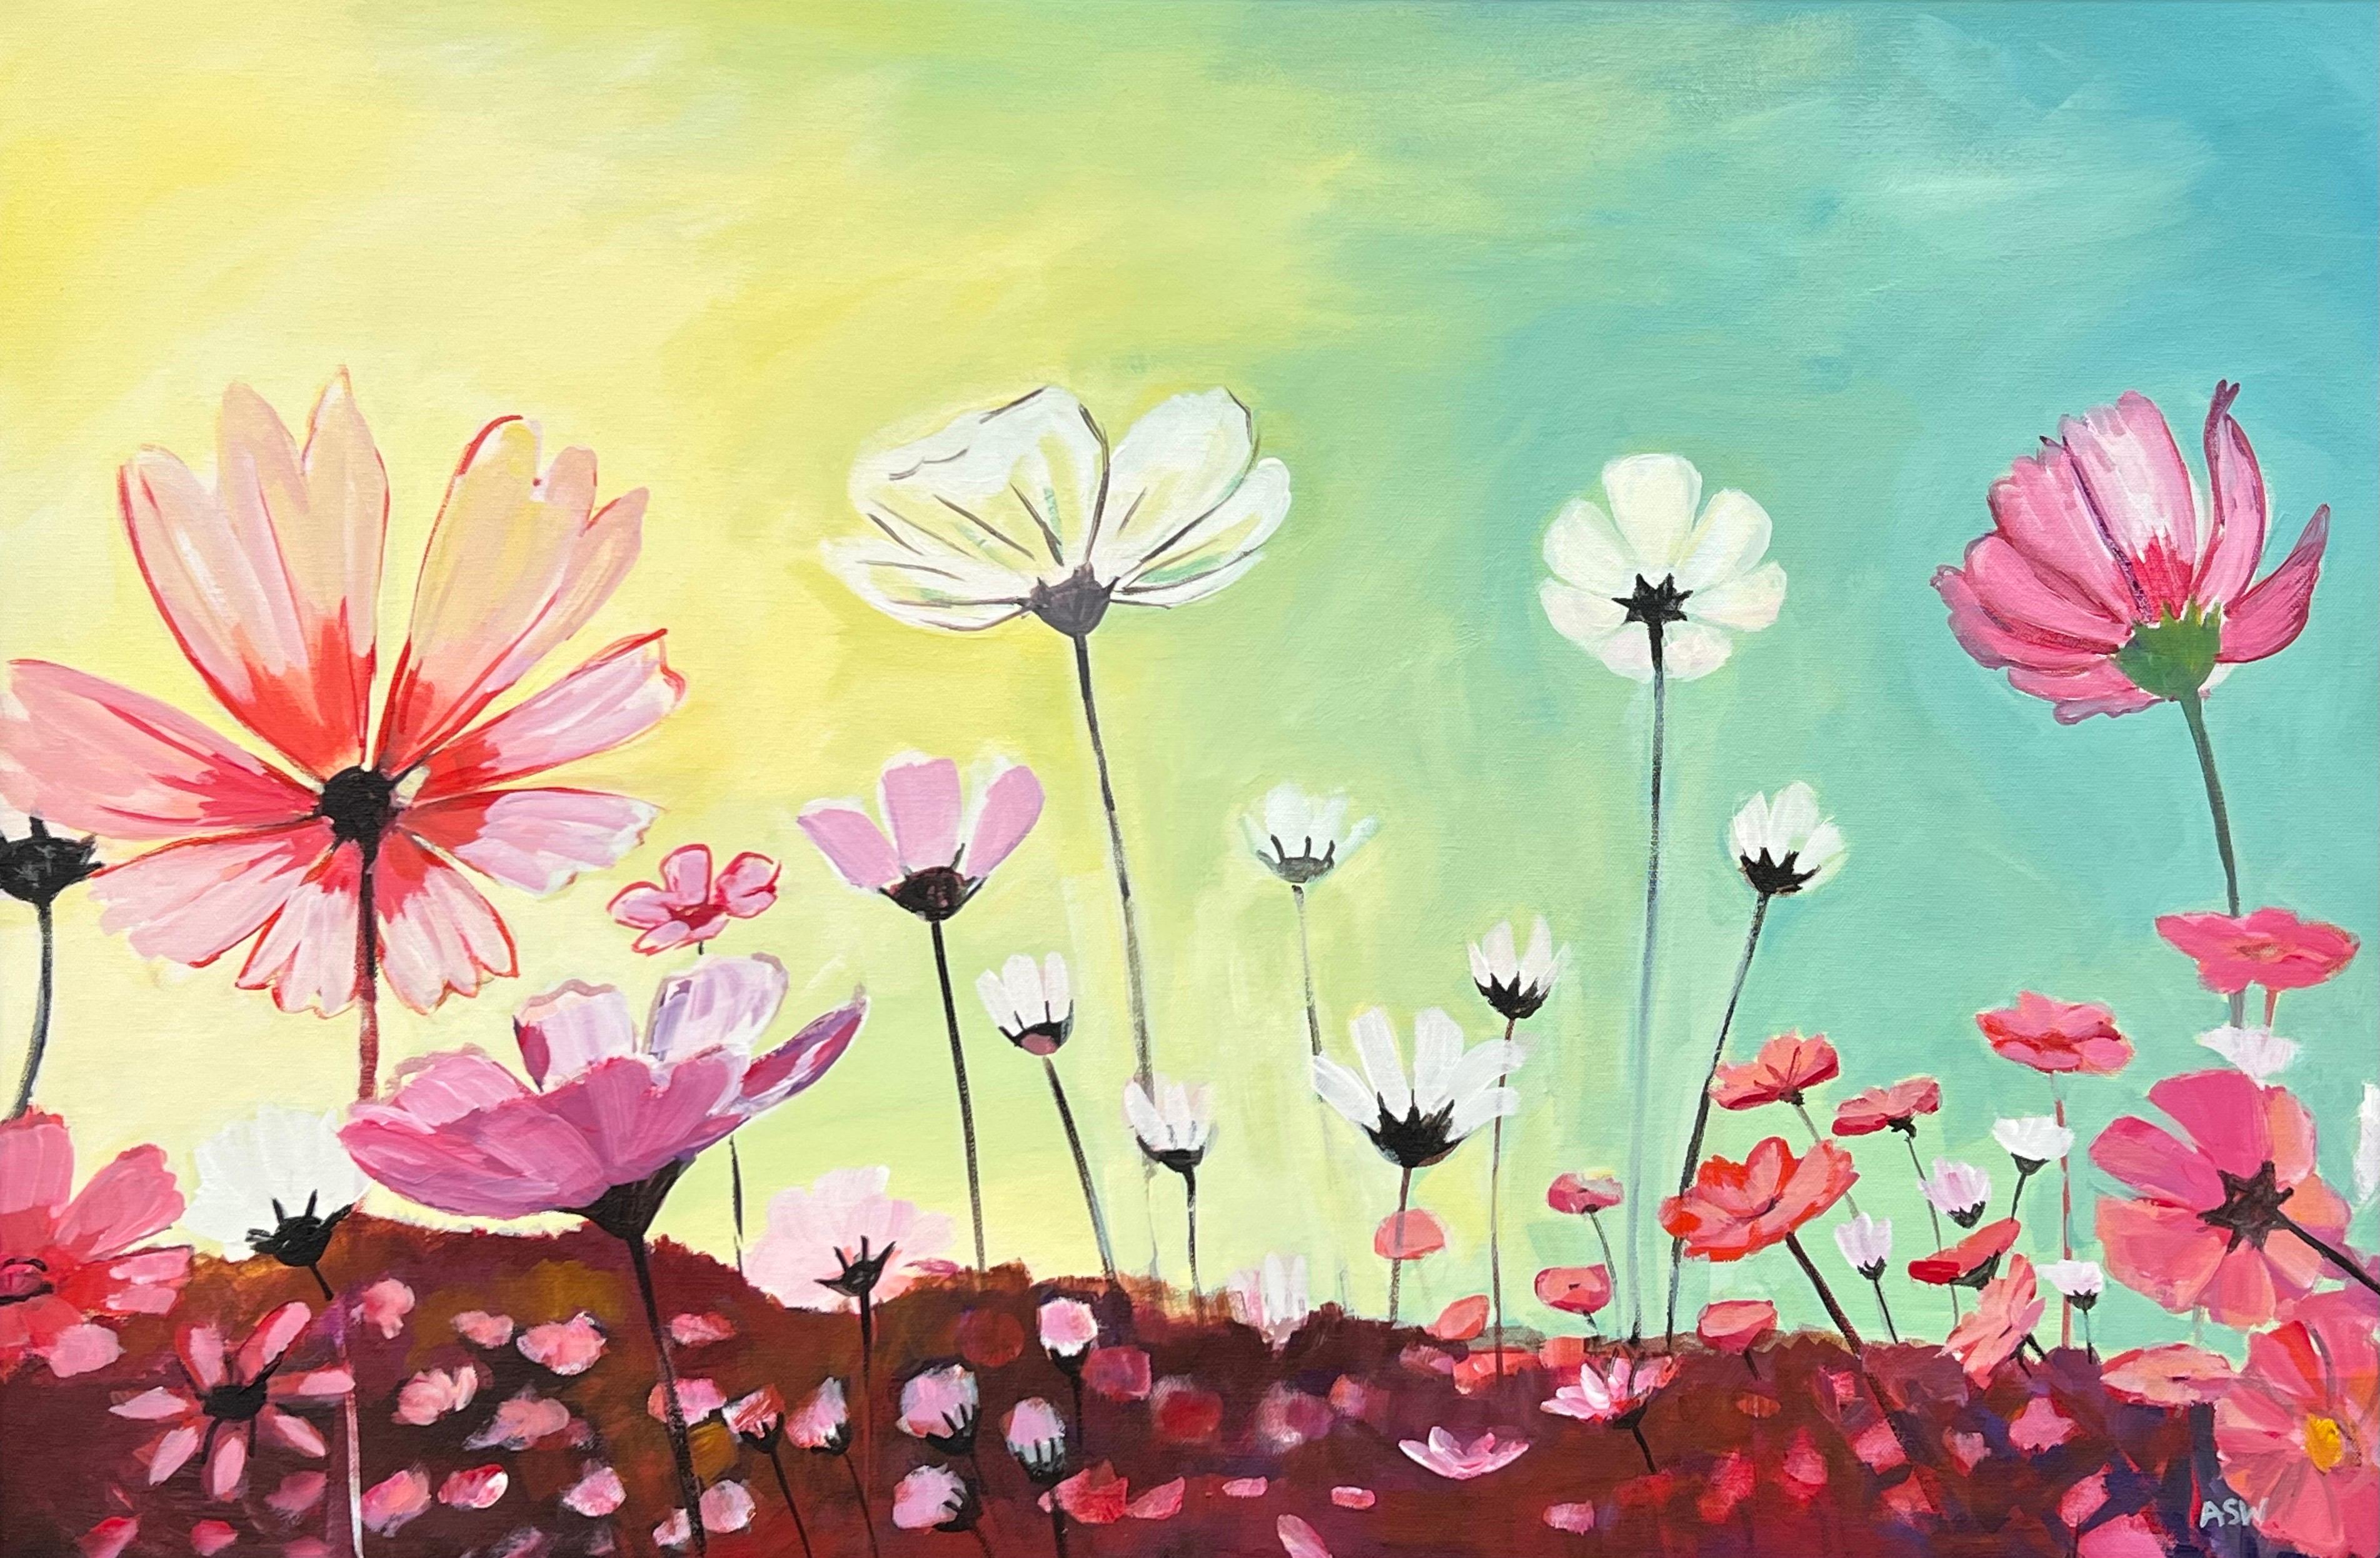 Design Study of Wild Pink & White Flowers on a Yellow & Turquoise Background For Sale 5